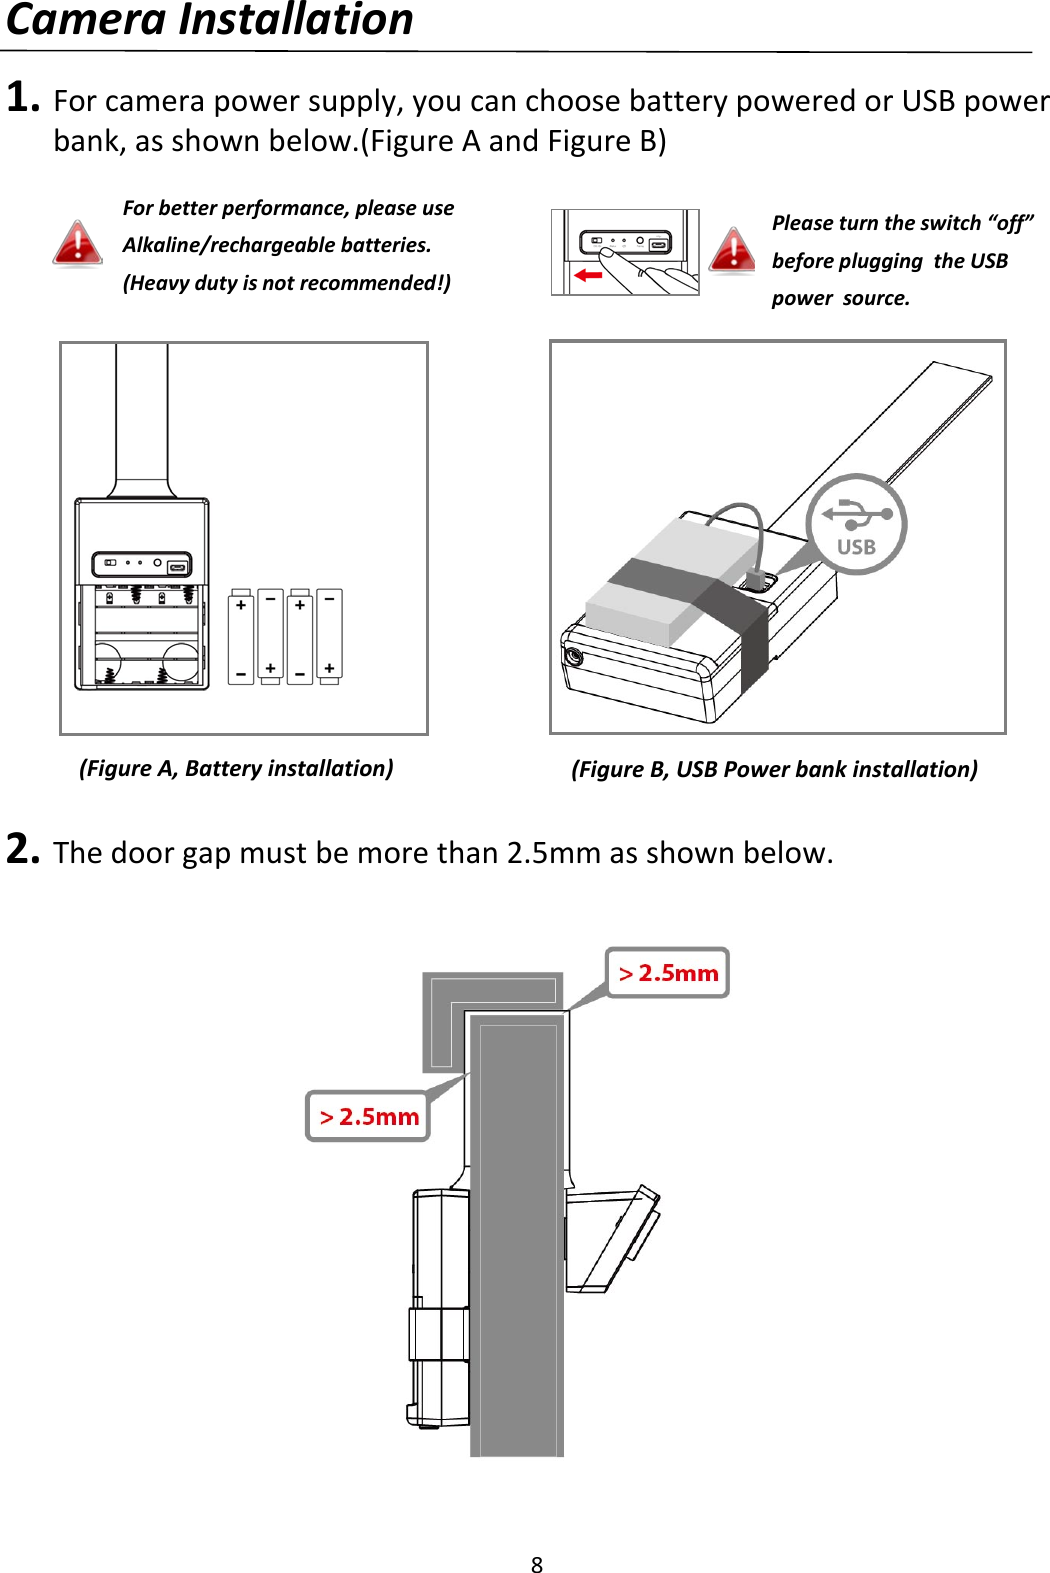 8  Camera Installation  1. For camera power supply, you can choose battery powered or USB power bank, as shown below.(Figure A and Figure B)                  2. The door gap must be more than 2.5mm as shown below.                  (Figure A, Battery installation) (Figure B, USB Power bank installation) For better performance, please use Alkaline/rechargeable batteries. (Heavy duty is not recommended!) Please turn the switch “off” before plugging  the USB power  source. 